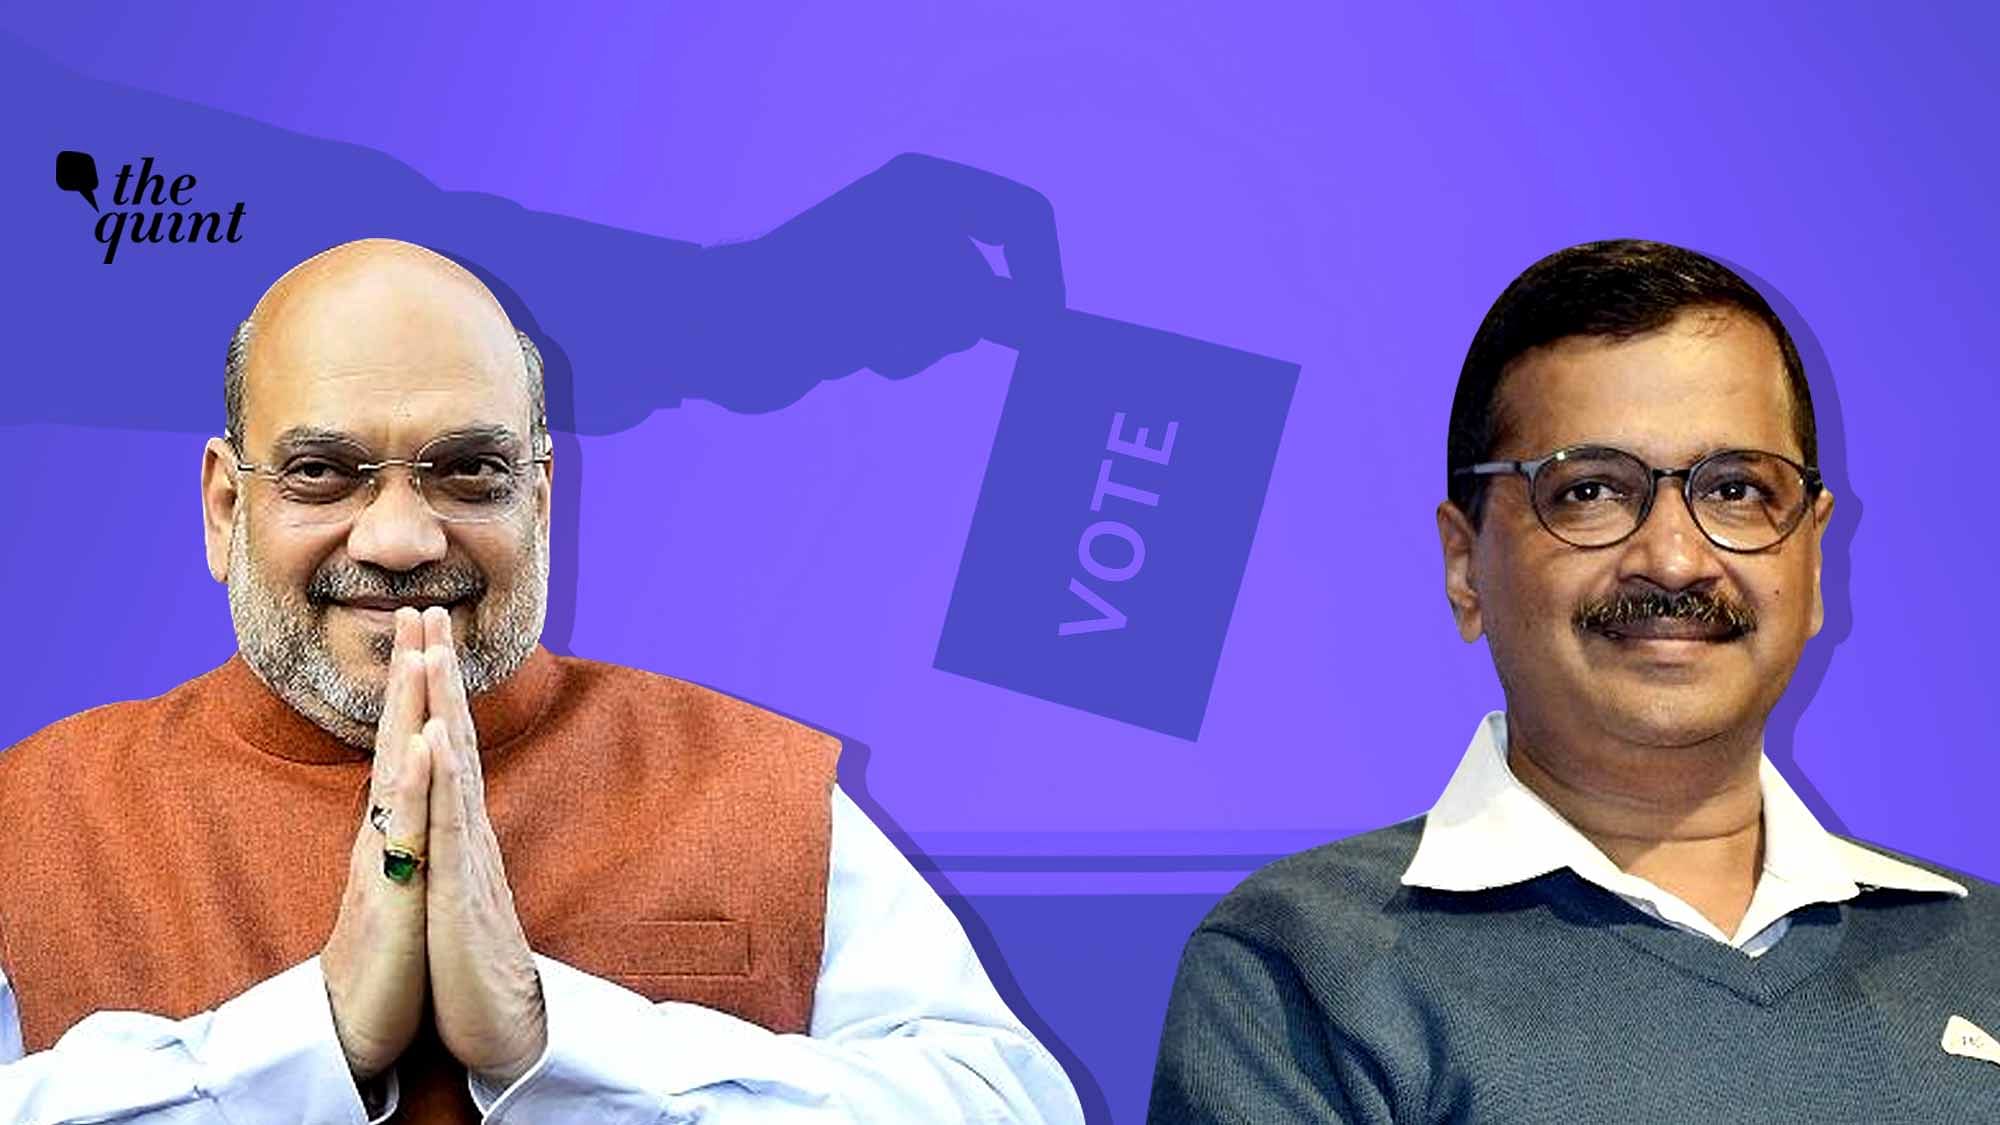 Exit polls were consistent in forecasting a virtual landslide for the AAP in the Delhi assembly elections. Is it time for the BJP to rethink its strategy?